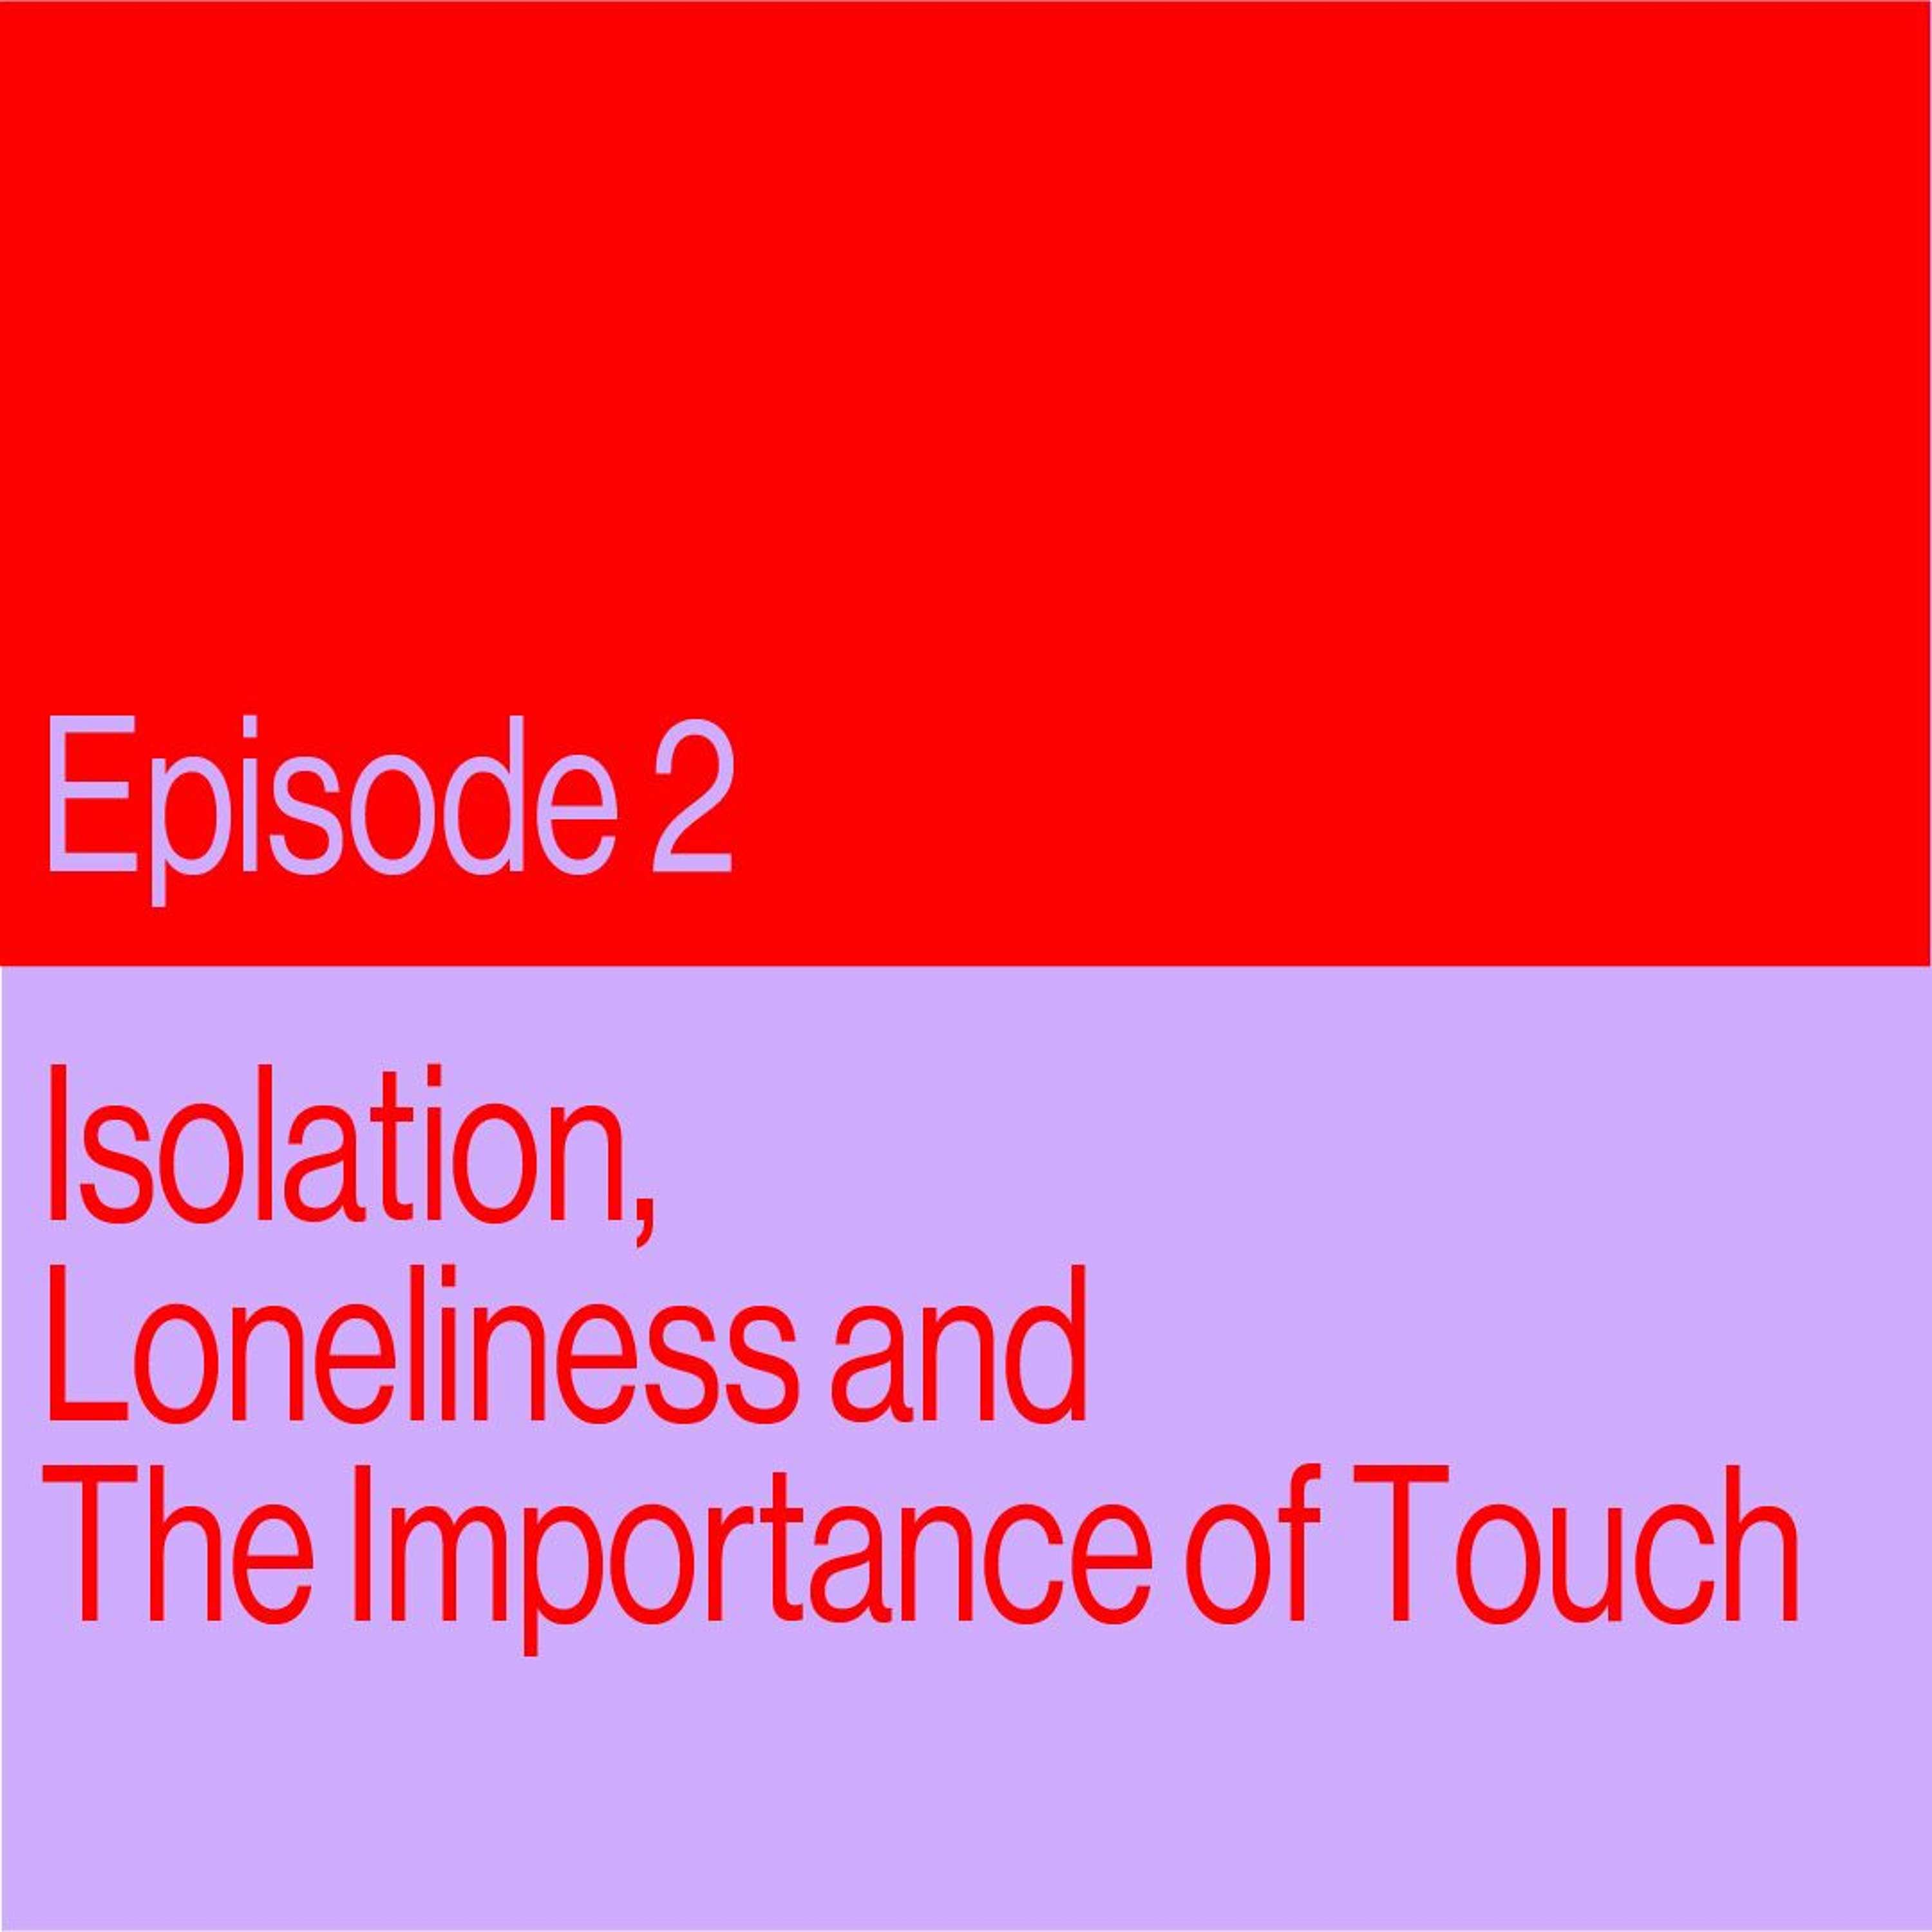 Episode 2: Isolation, Loneliness, and the Importance of Touch